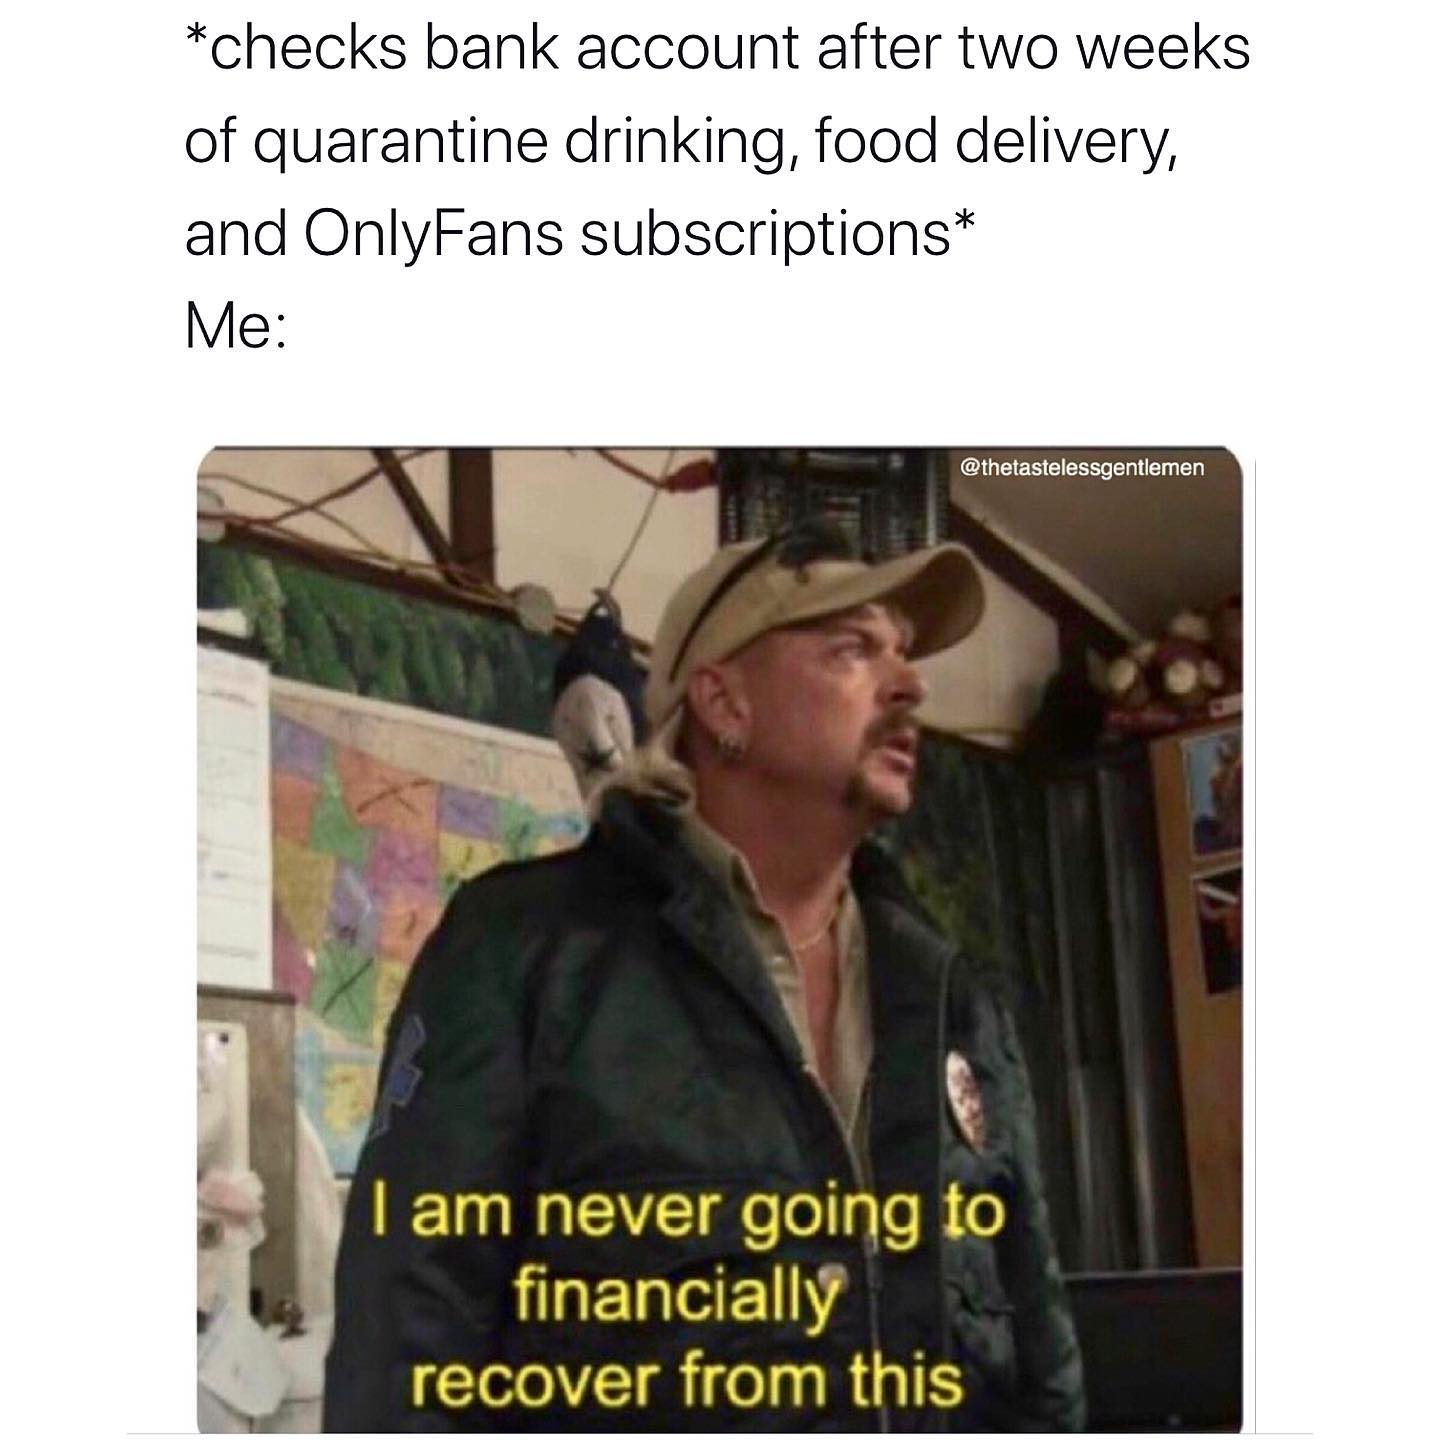 Internet meme - checks bank account after two weeks of quarantine drinking, food delivery, and OnlyFans subscriptions Me I am never going to financially recover from this